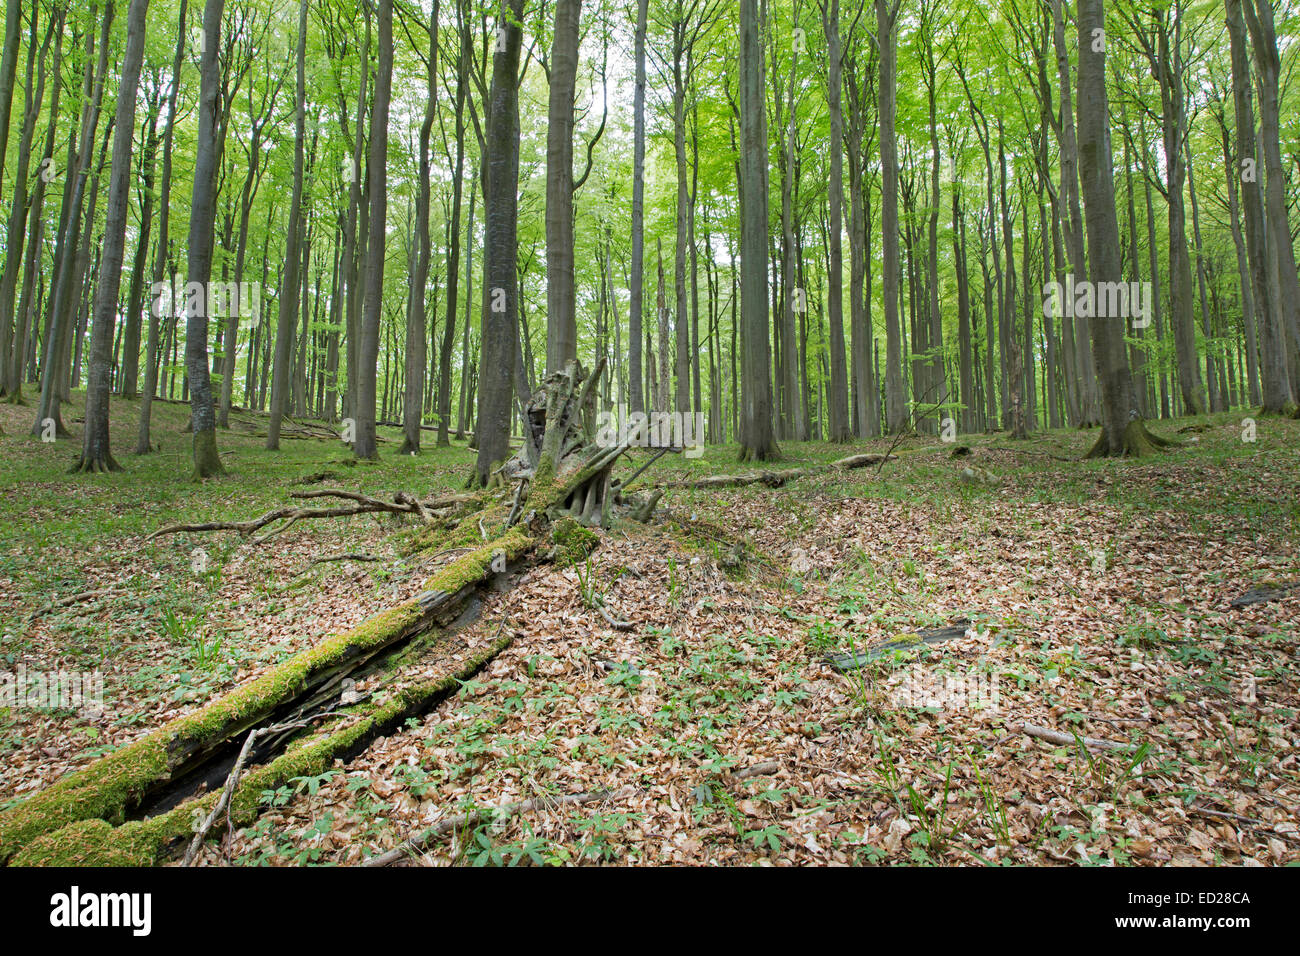 Beech forest (Fagus sylvatica), forest in spring, Jasmund National Park, UNESCO World Heritage Site, Rügen, Germany Stock Photo